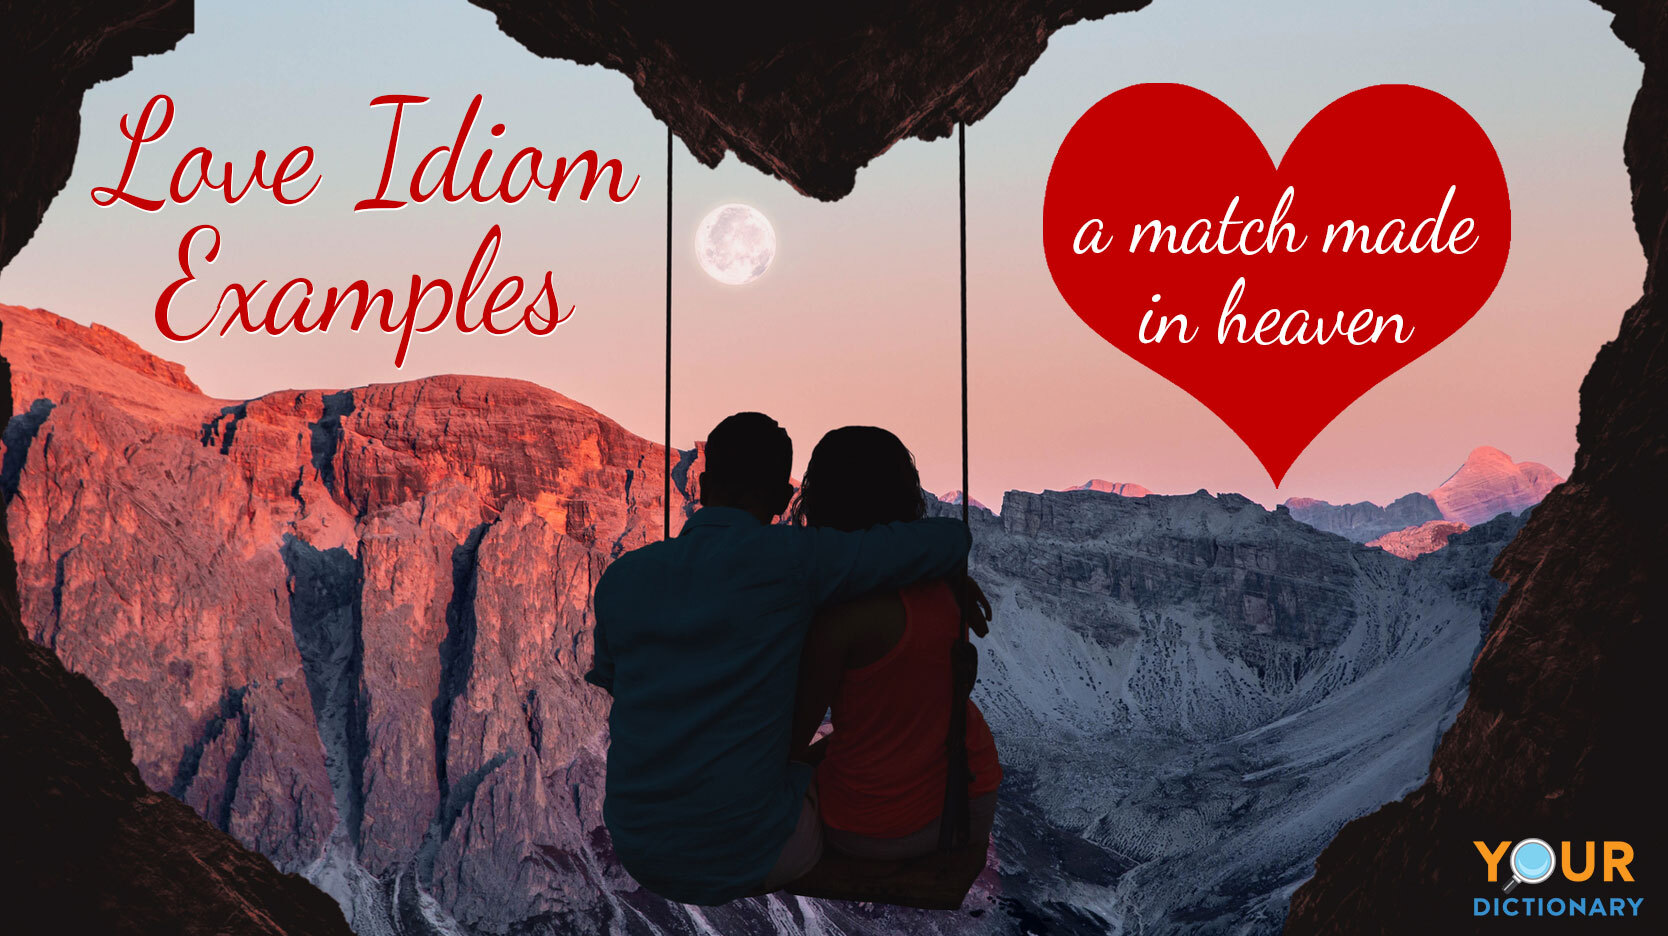 love idioms examples with couple on swing